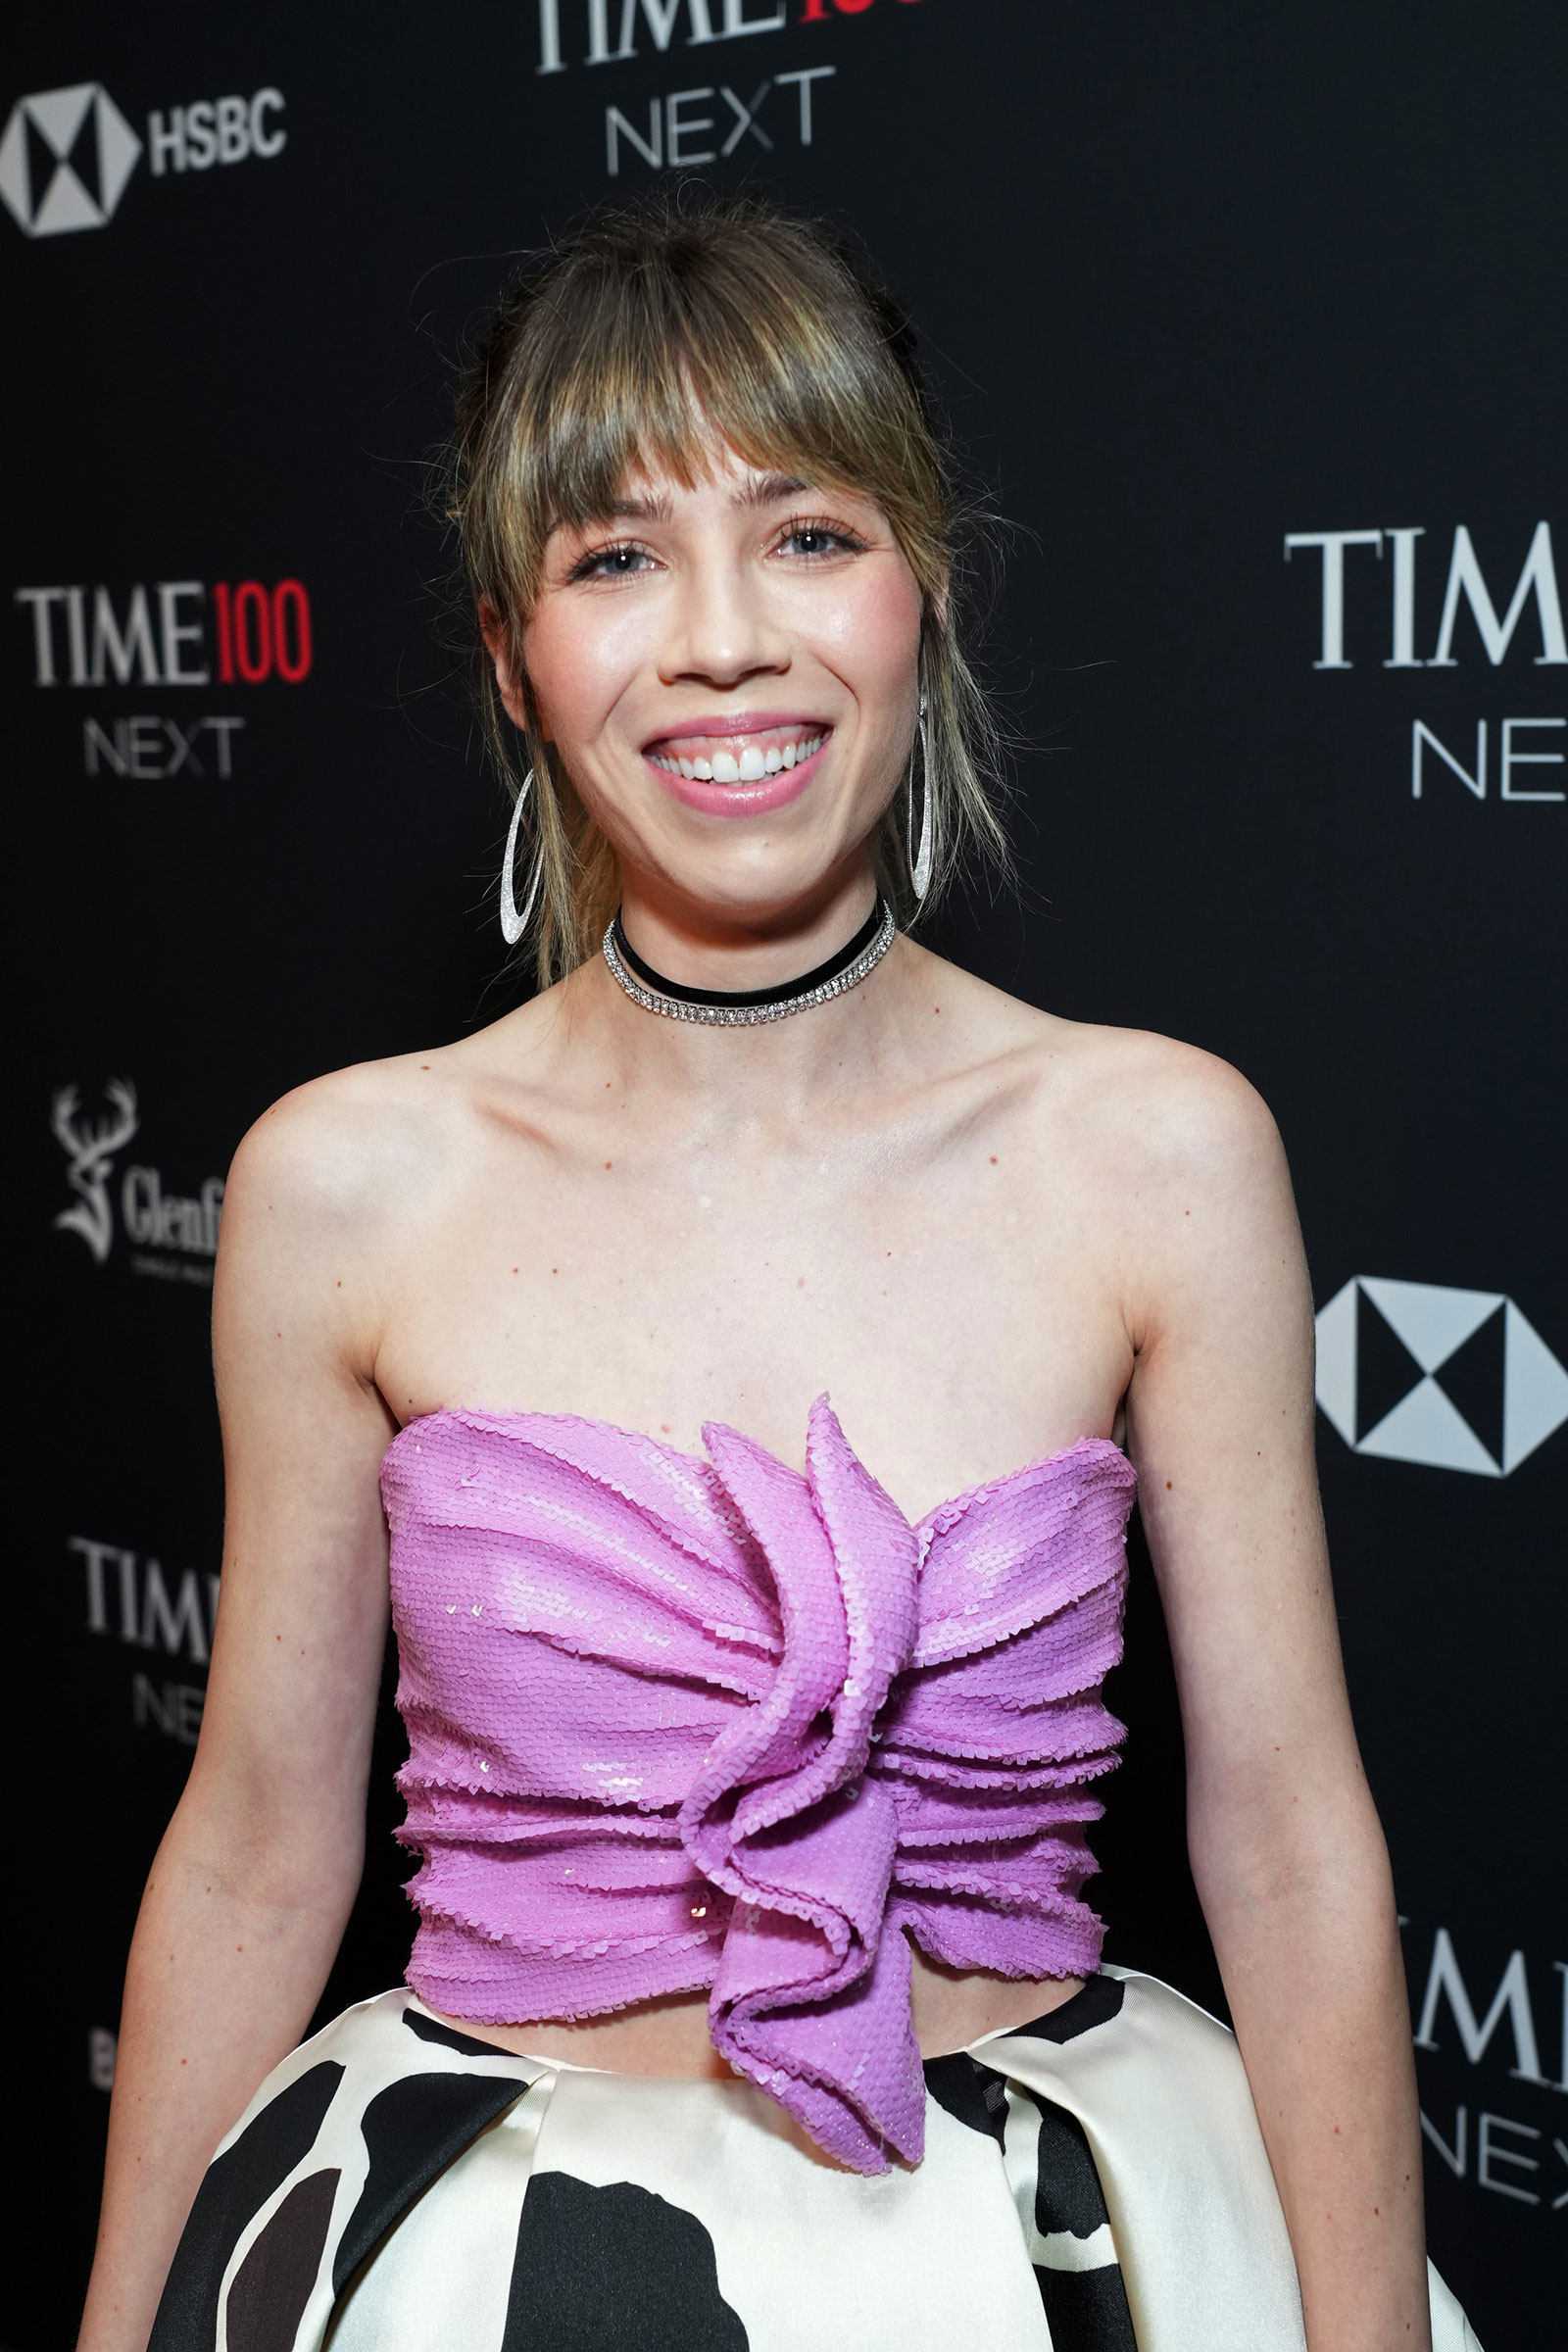 Author Jennette McCurdy attends the TIME100 Next Gala in New York City on Oct. 25, 2022. (Kevin Mazur—Getty Images for TIME)